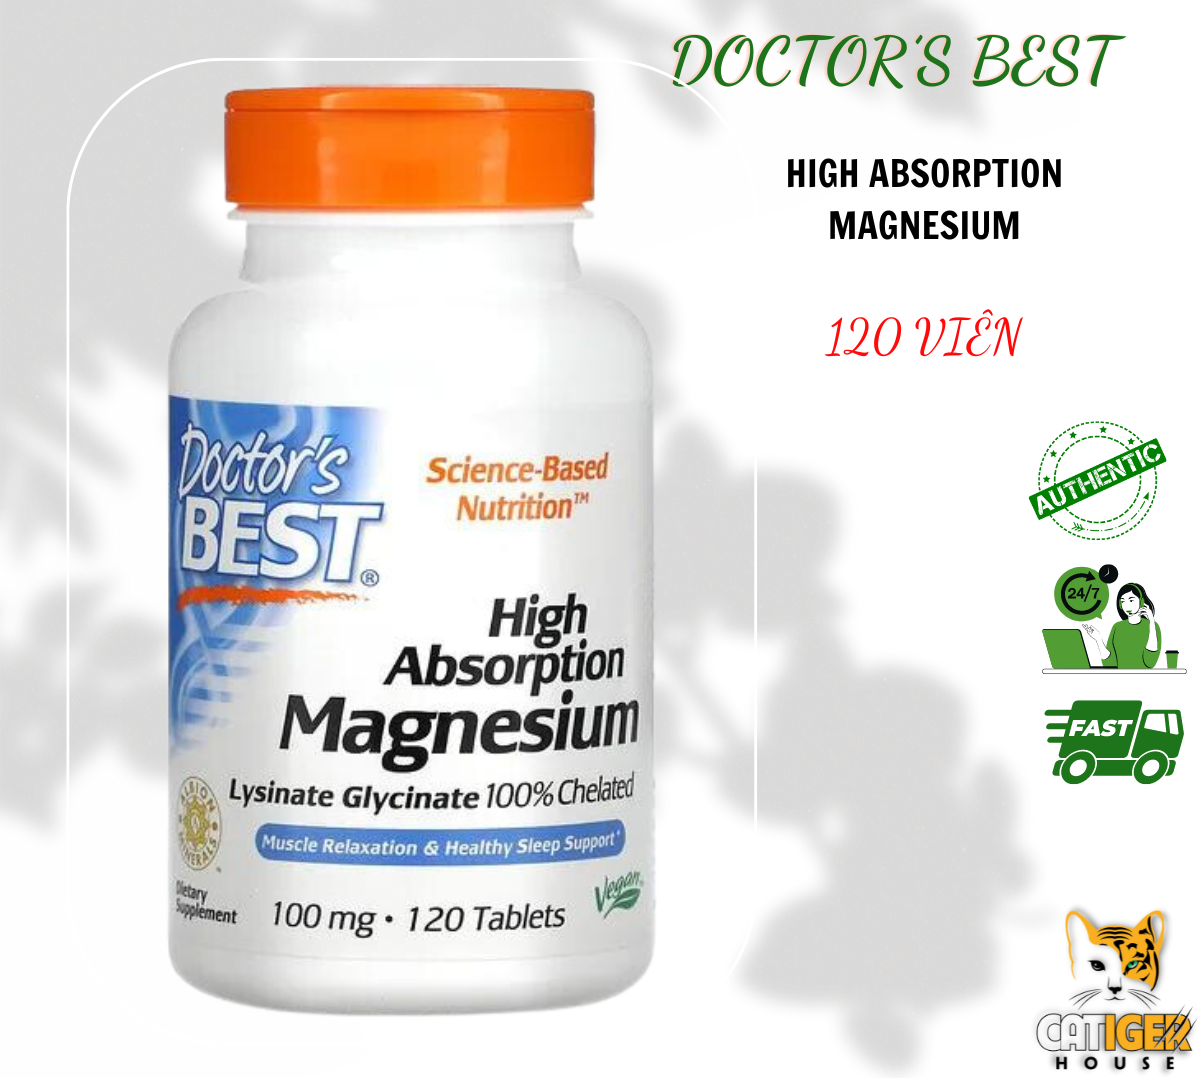 Doctor s Best High Absorption Magnesium 100mg - Viên uống bổ sung magie